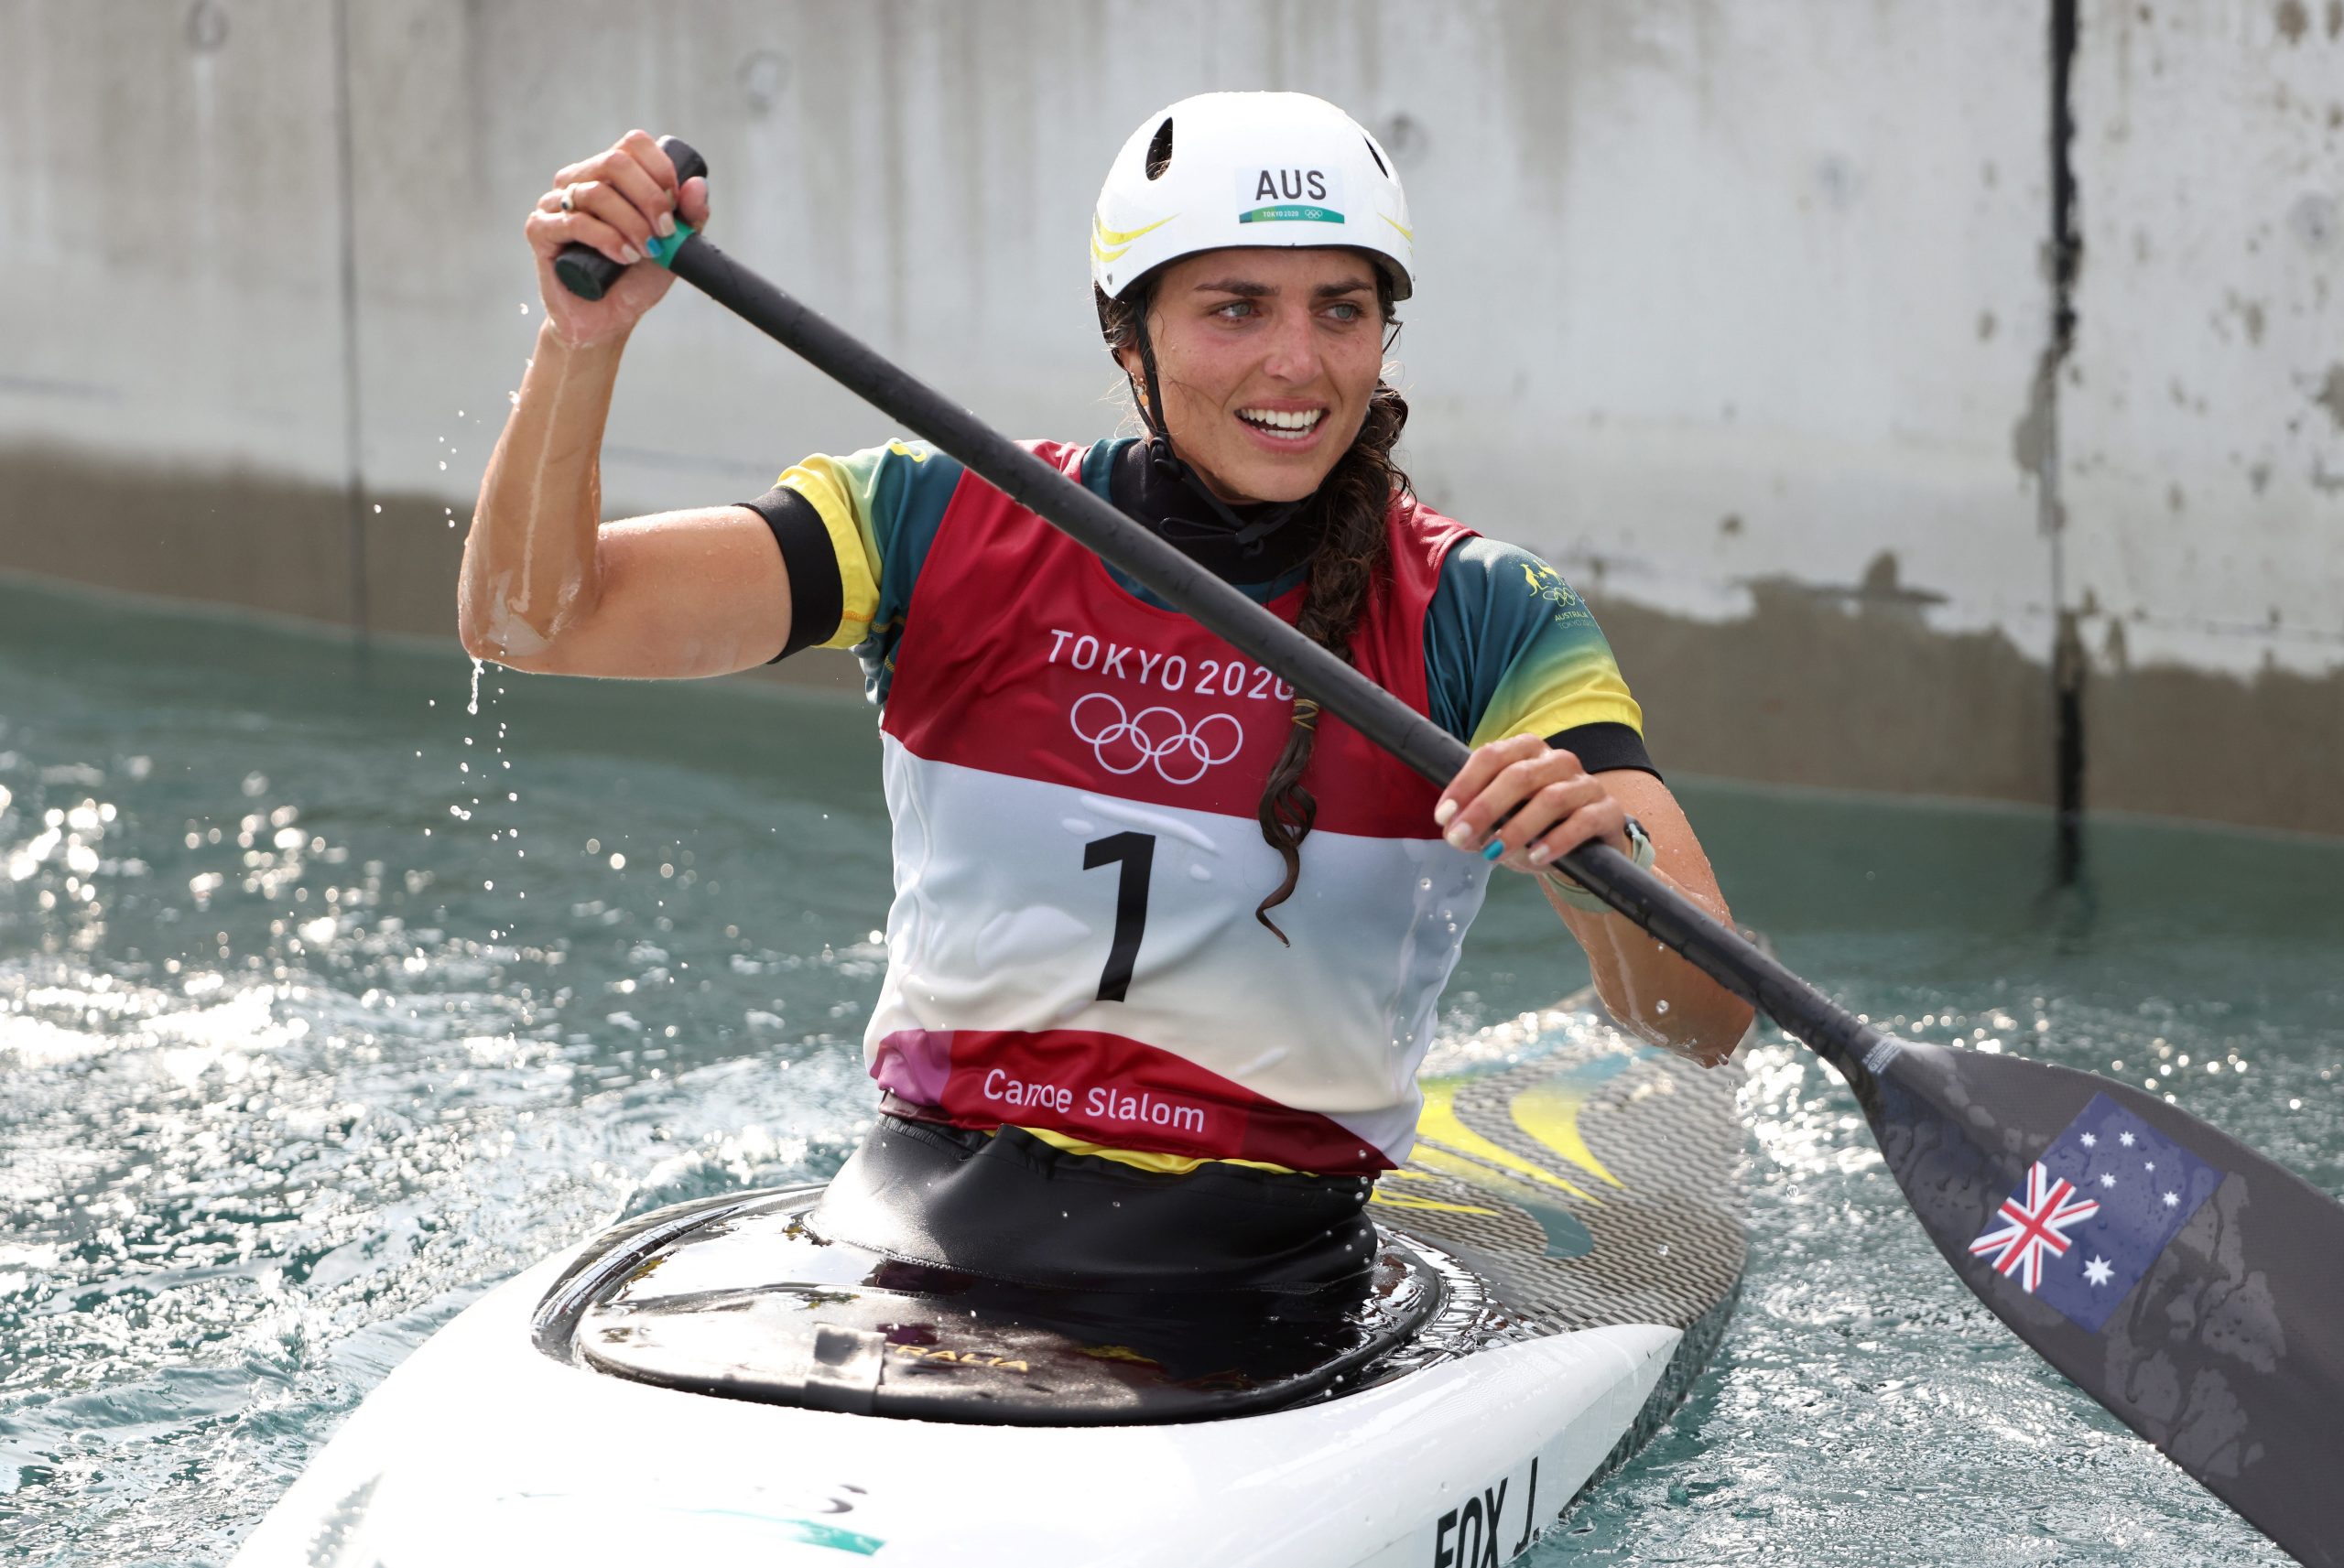 Jessica Fox of Team Australia in the Women's Canoe Slalom Final at the Tokyo 2020 Olympic Games.